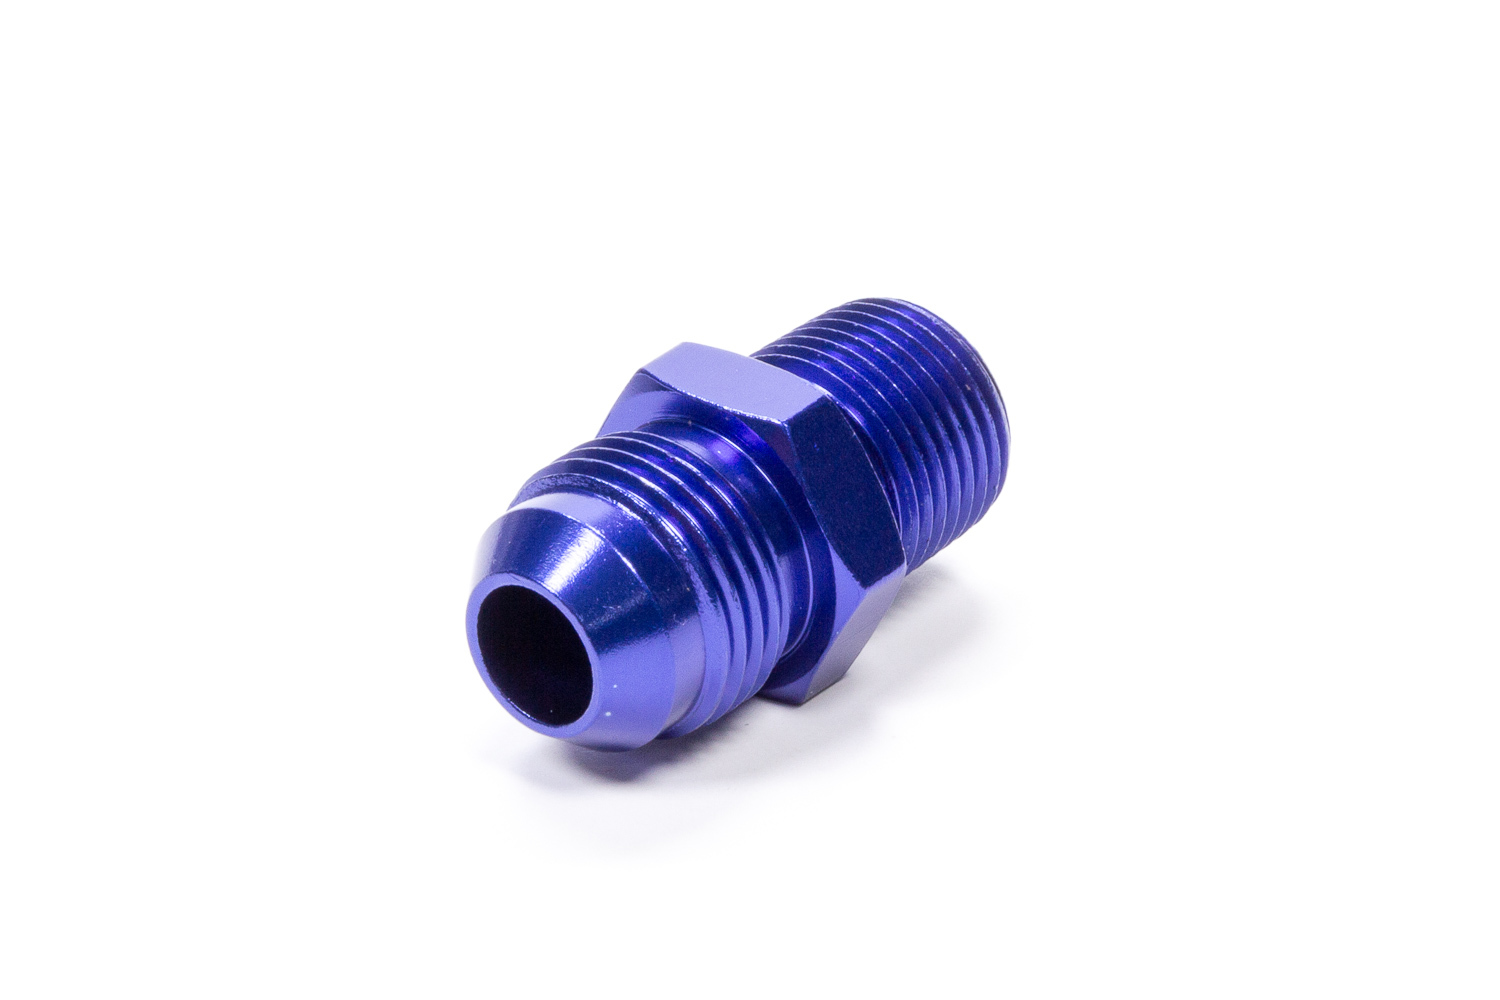 Fragola 481606 - Straight Adapter Fitting #6 x 1/4 MPT